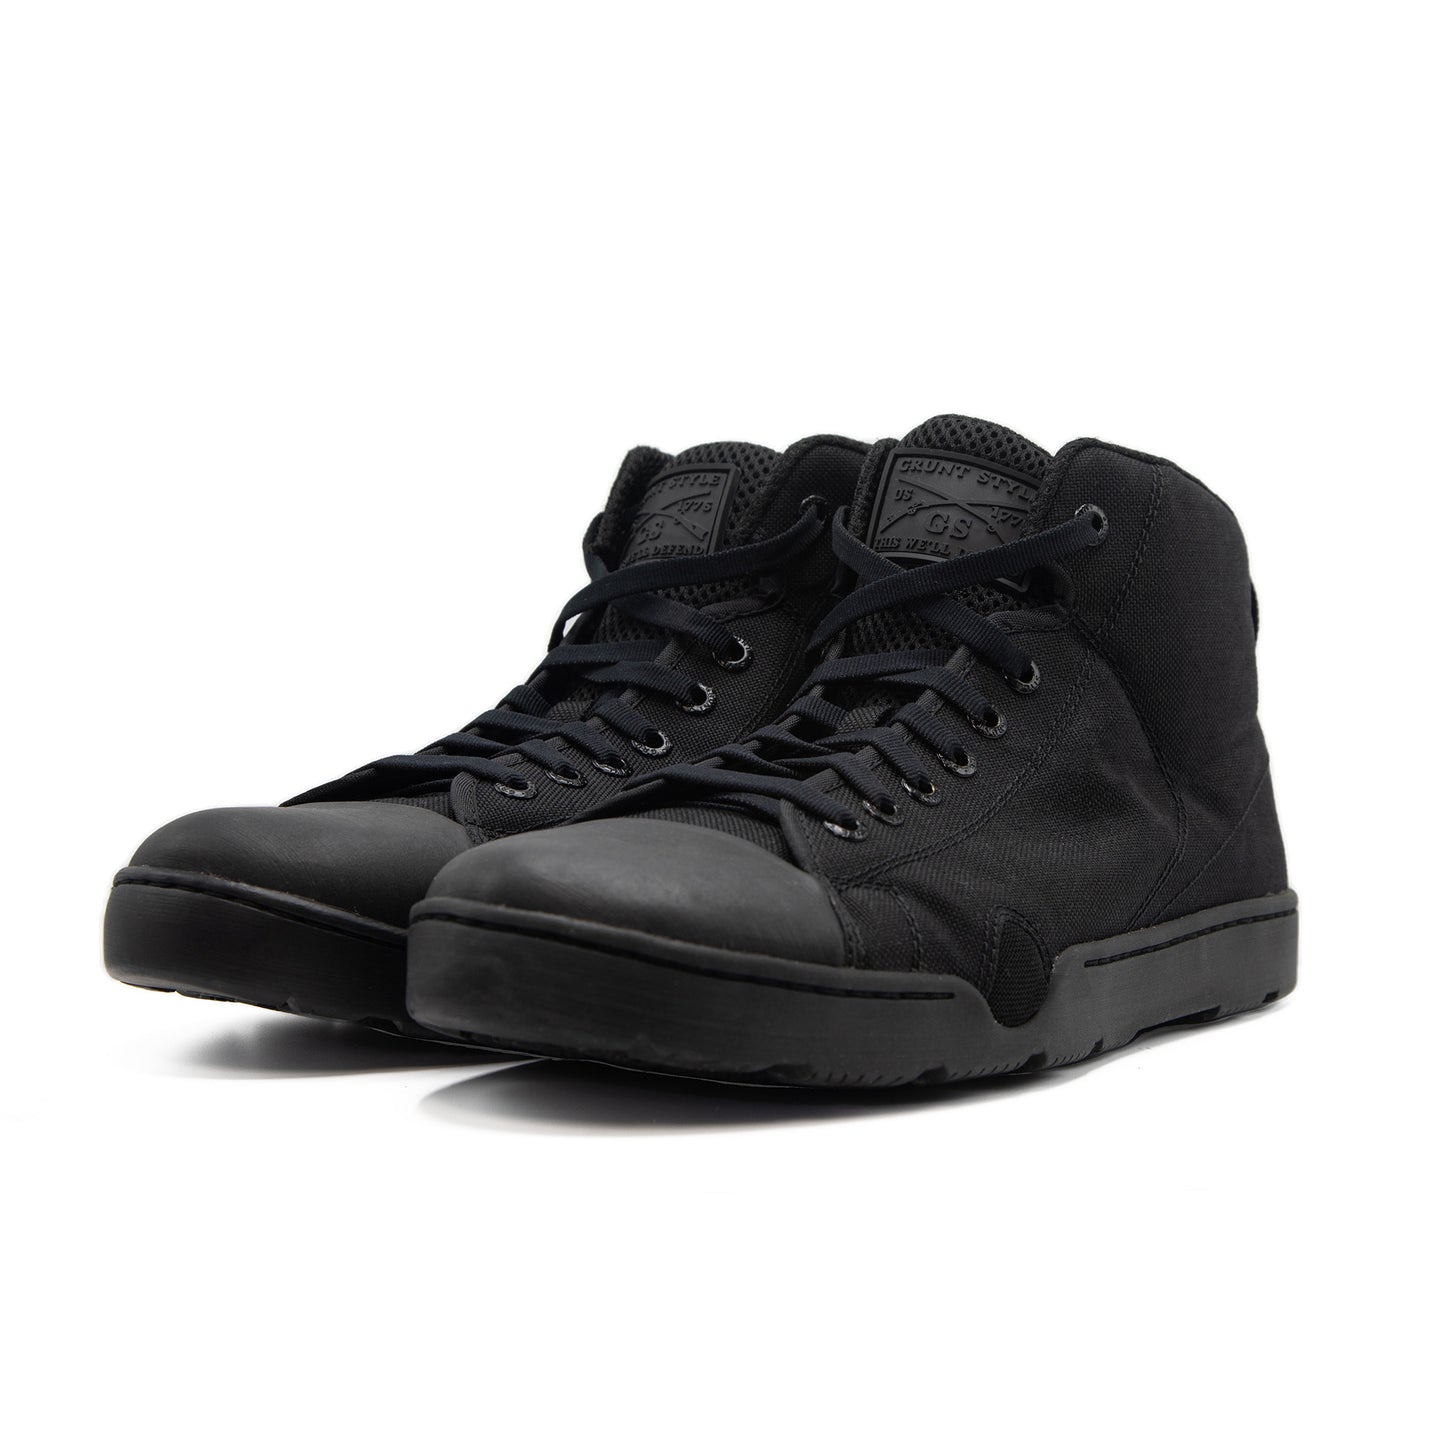  Tactical Shoes - Boot - Black Sneakers